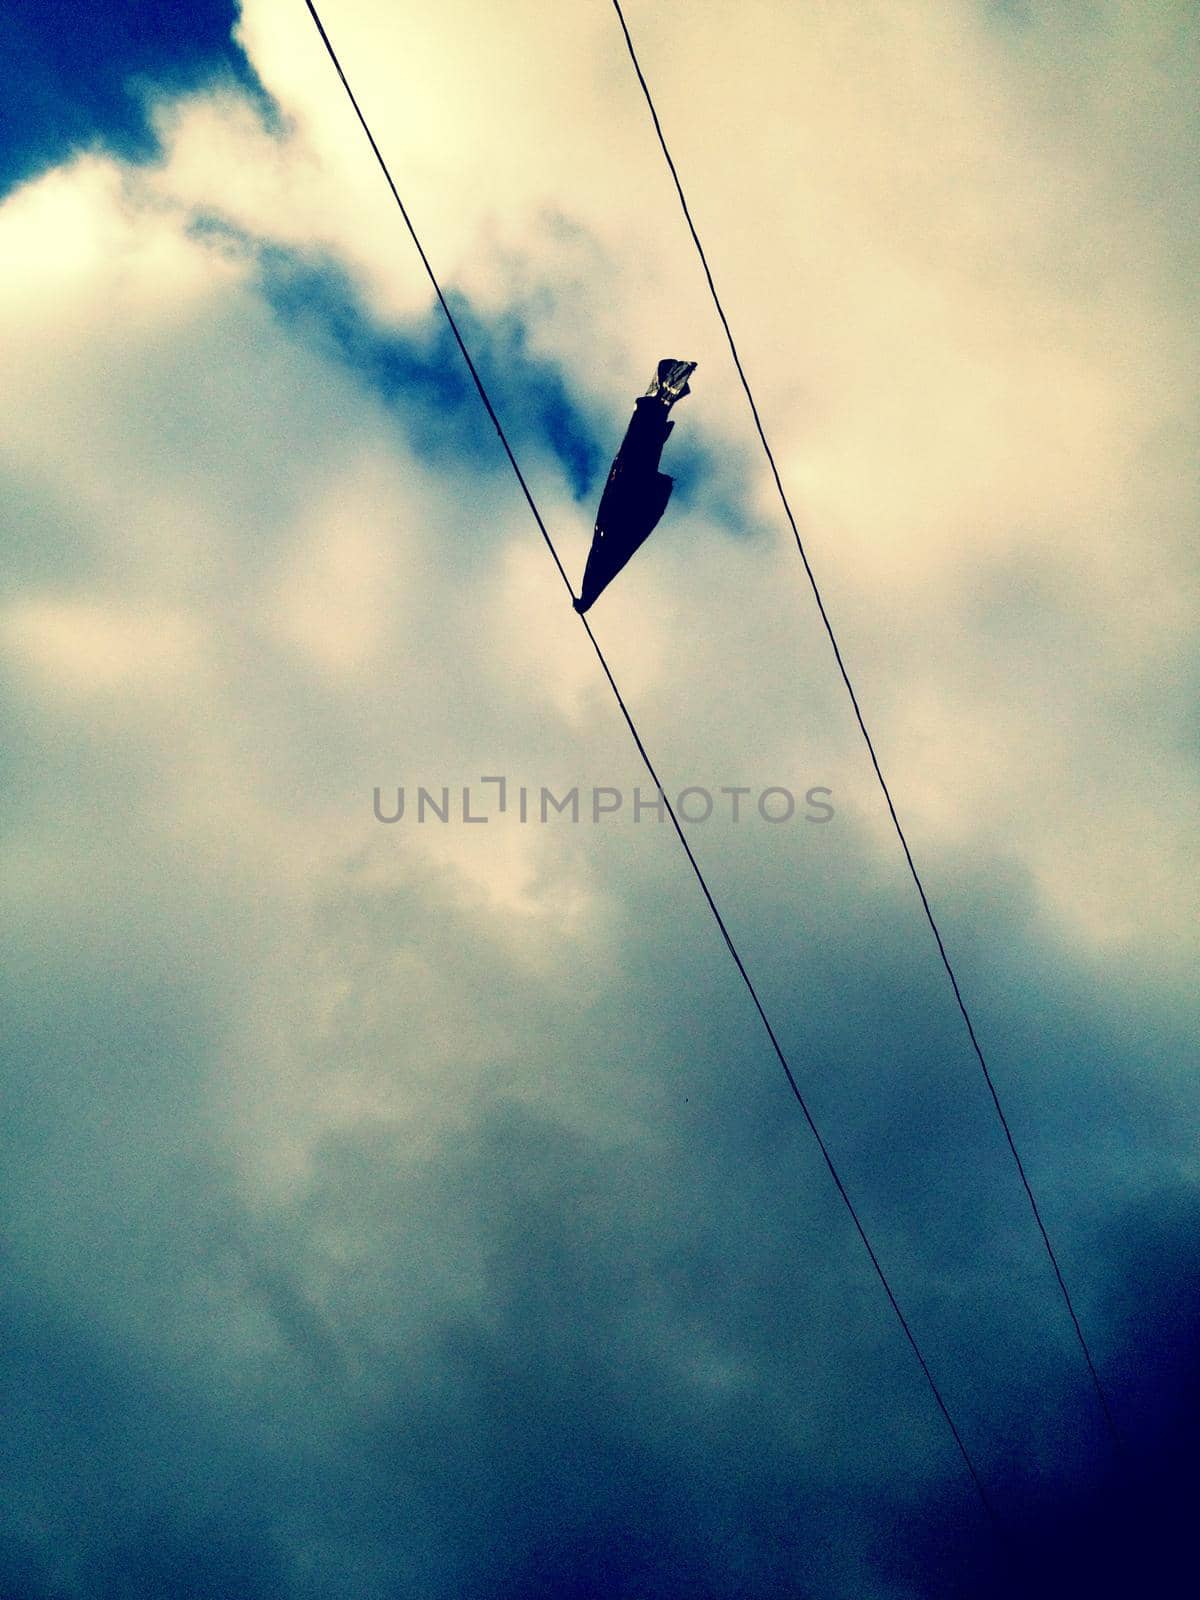 Image of Strange object attached to a phone line against a cloudy blue sky